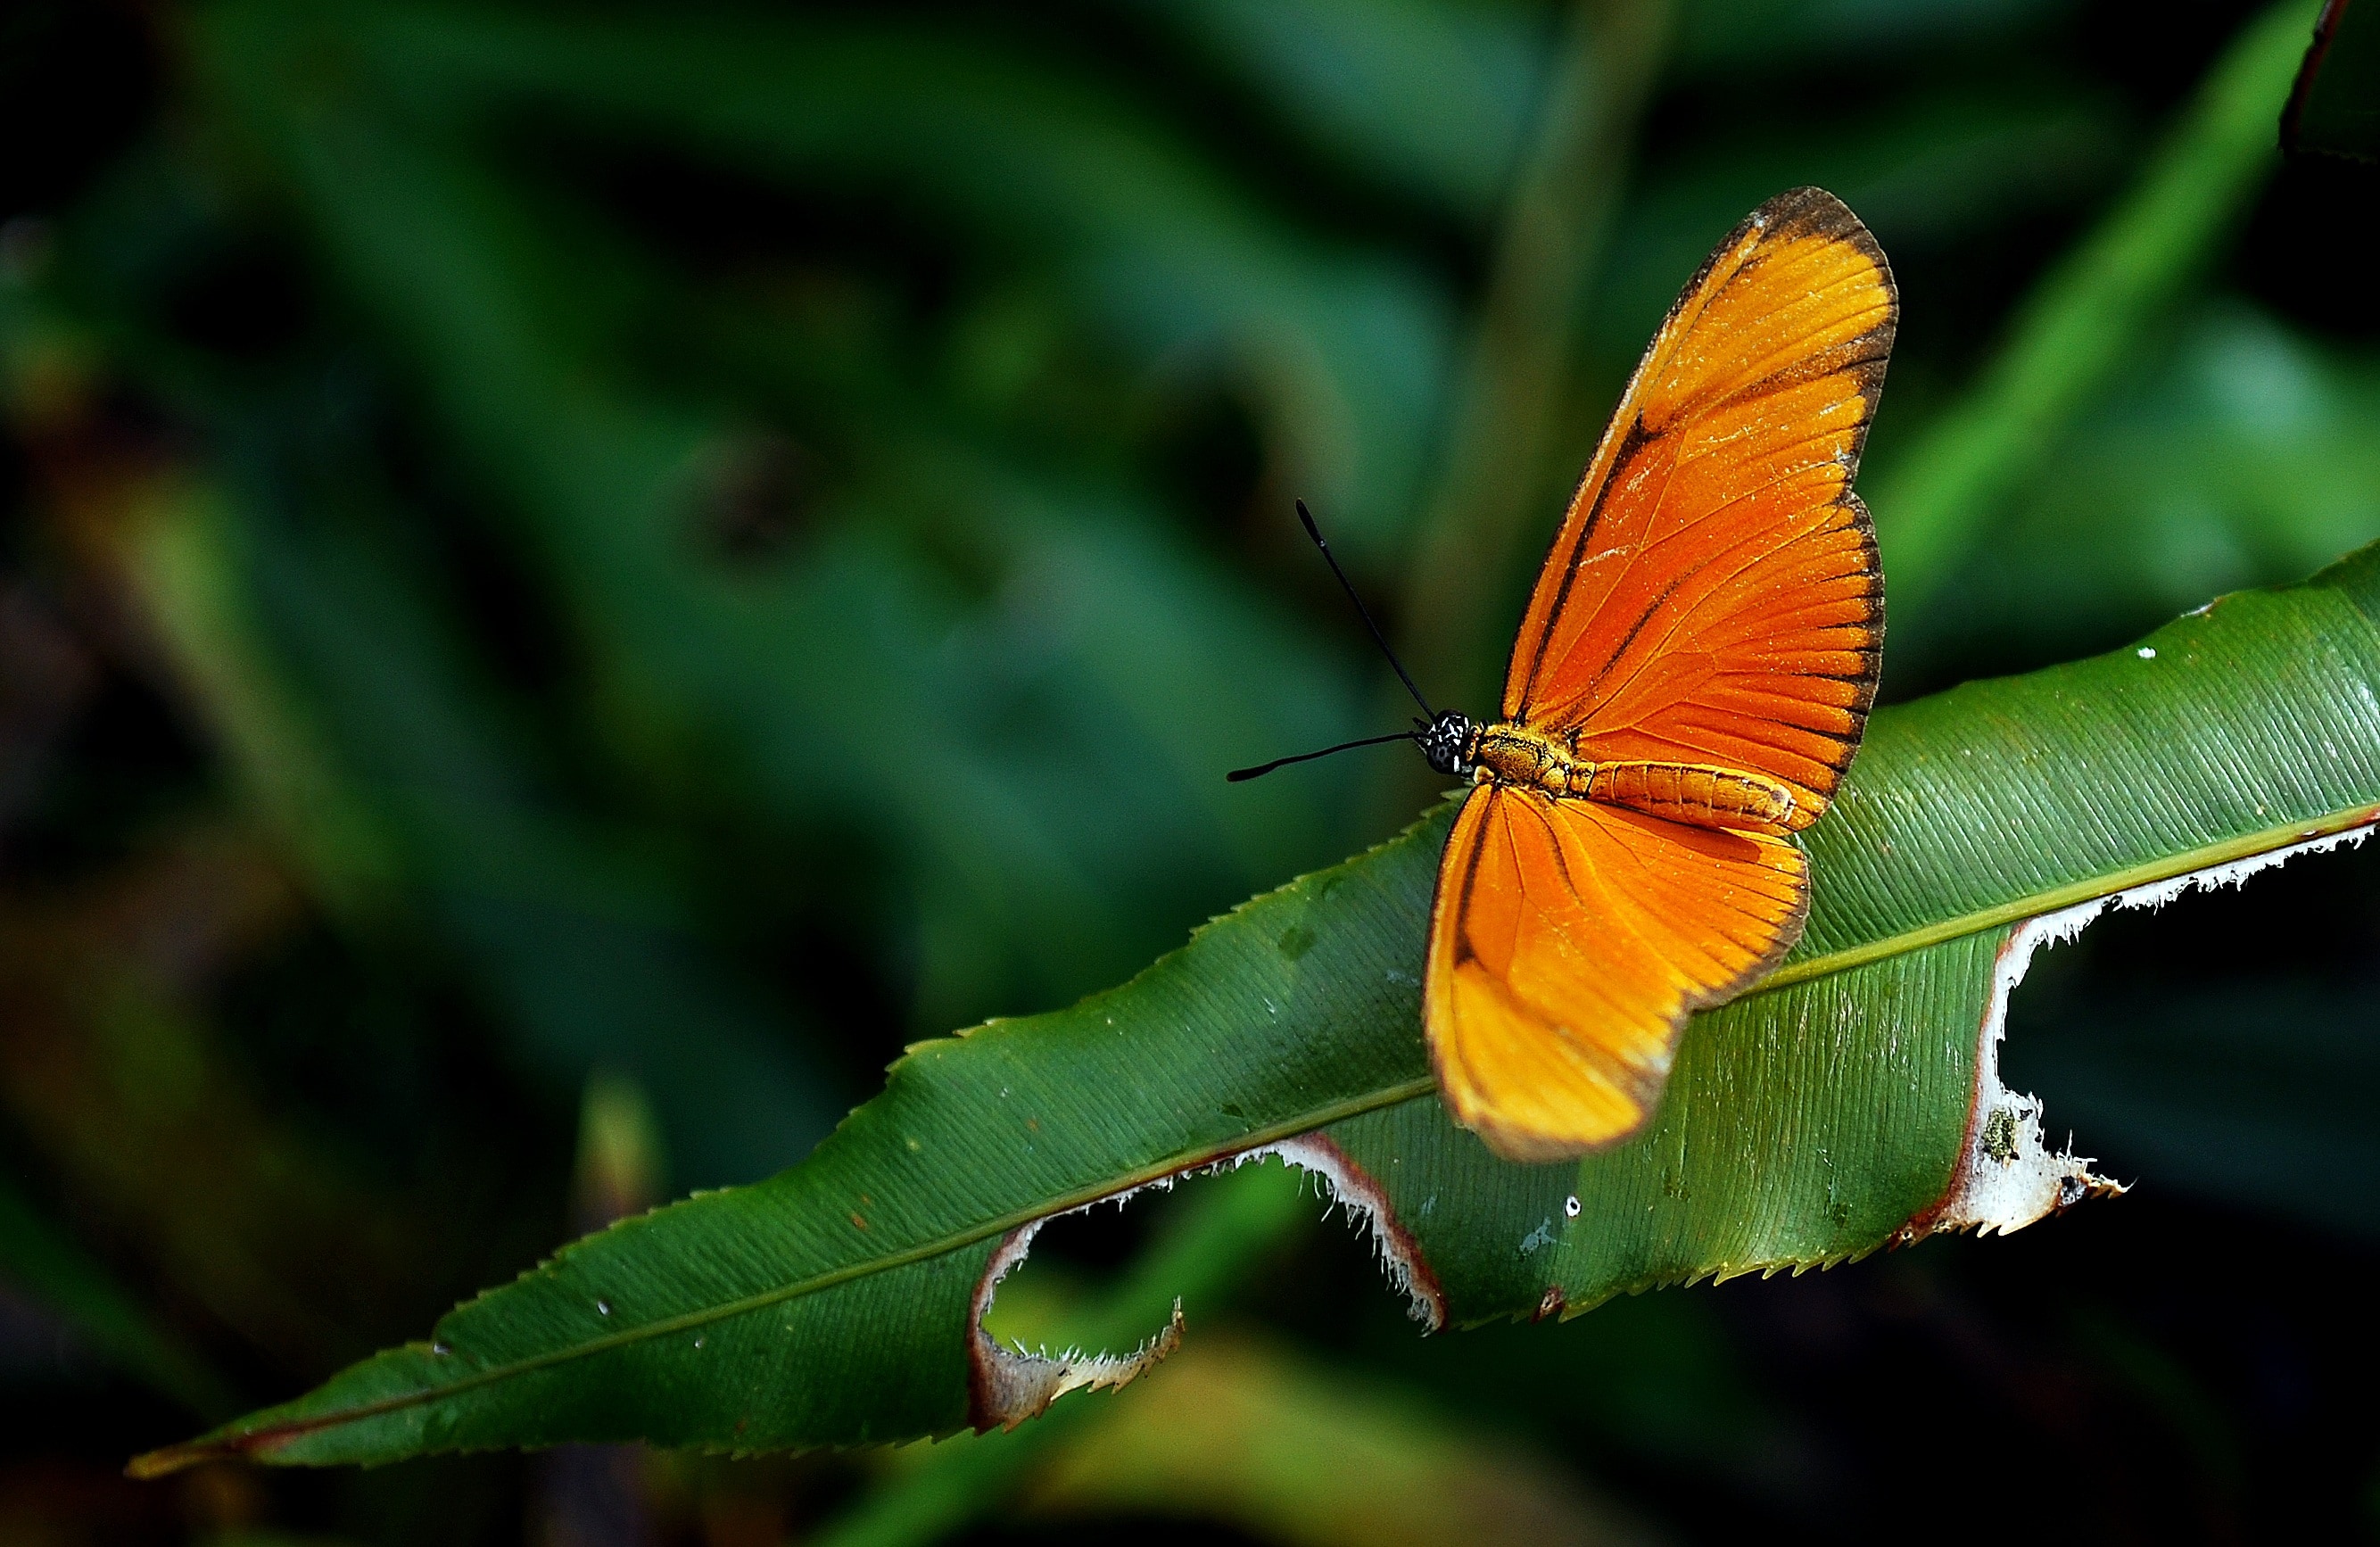 Butterfly, Insect, Nature, Orange, butterfly - insect, insect